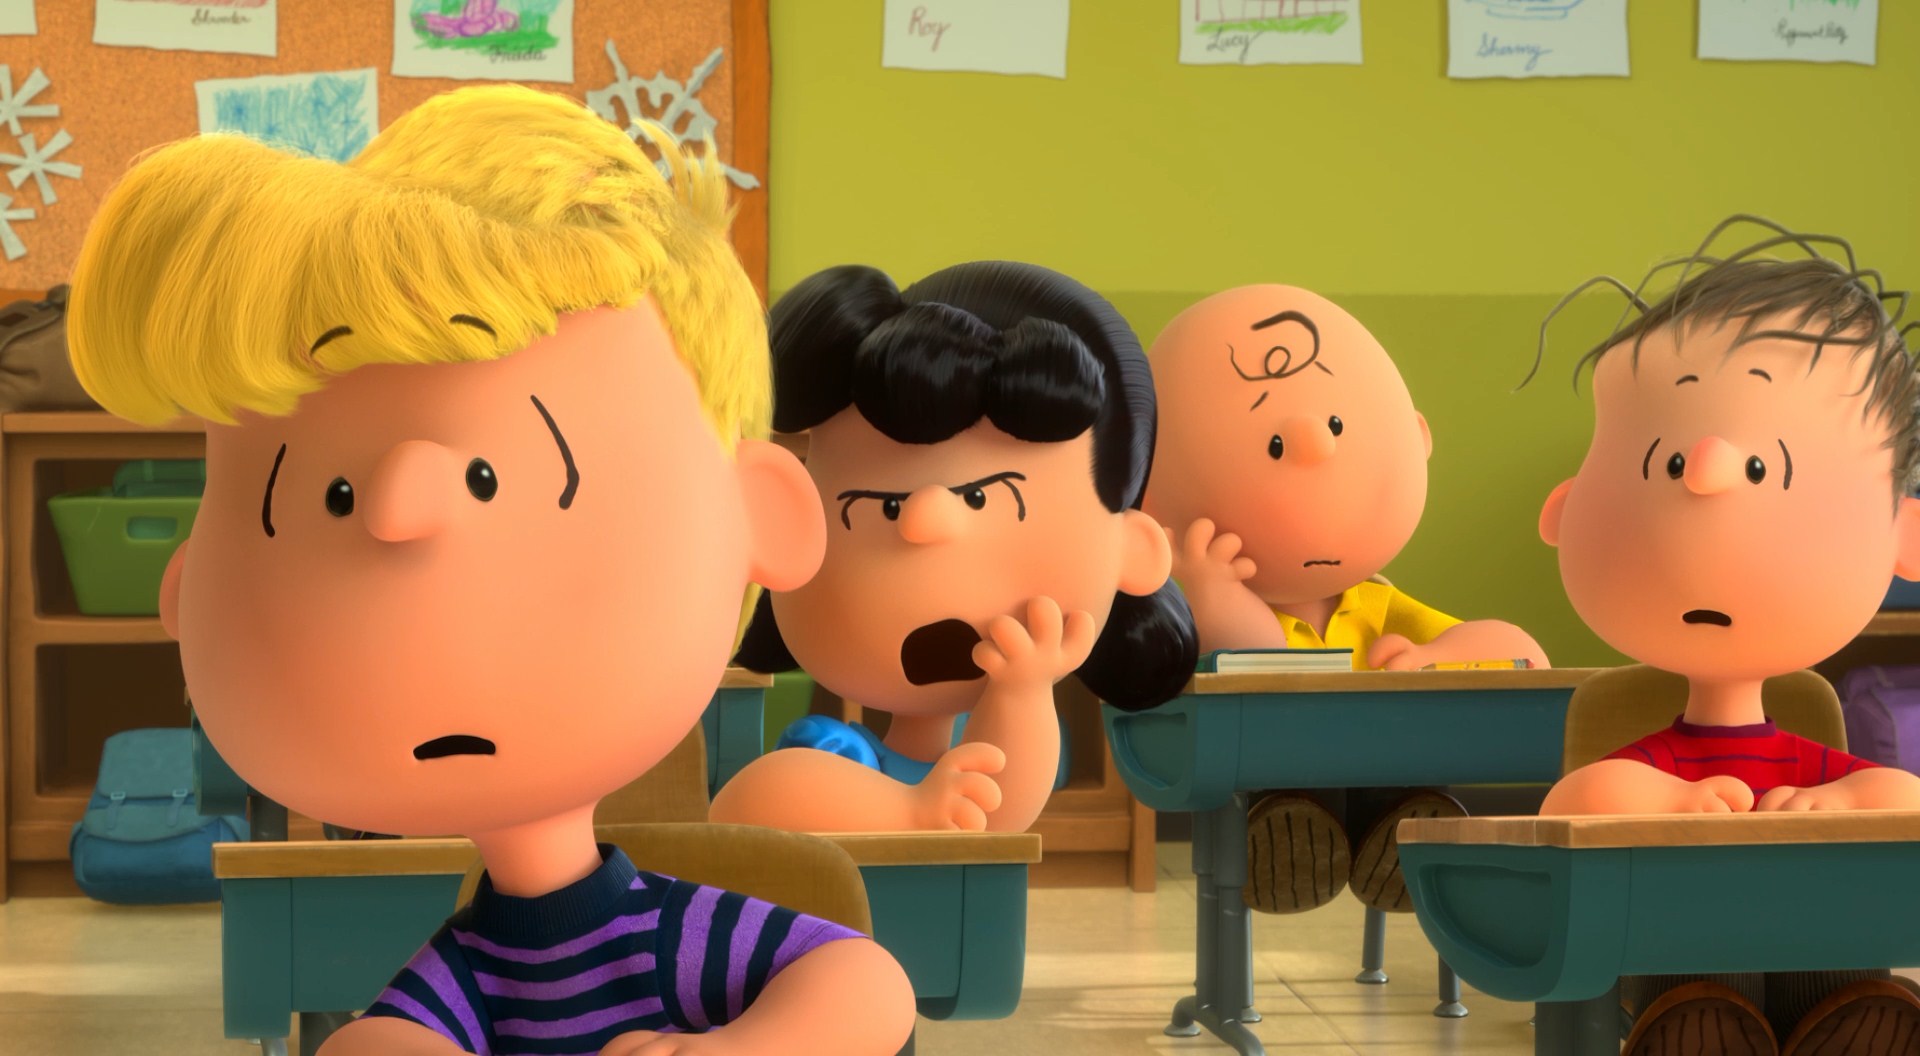 animats reviews the peanuts movie torrent